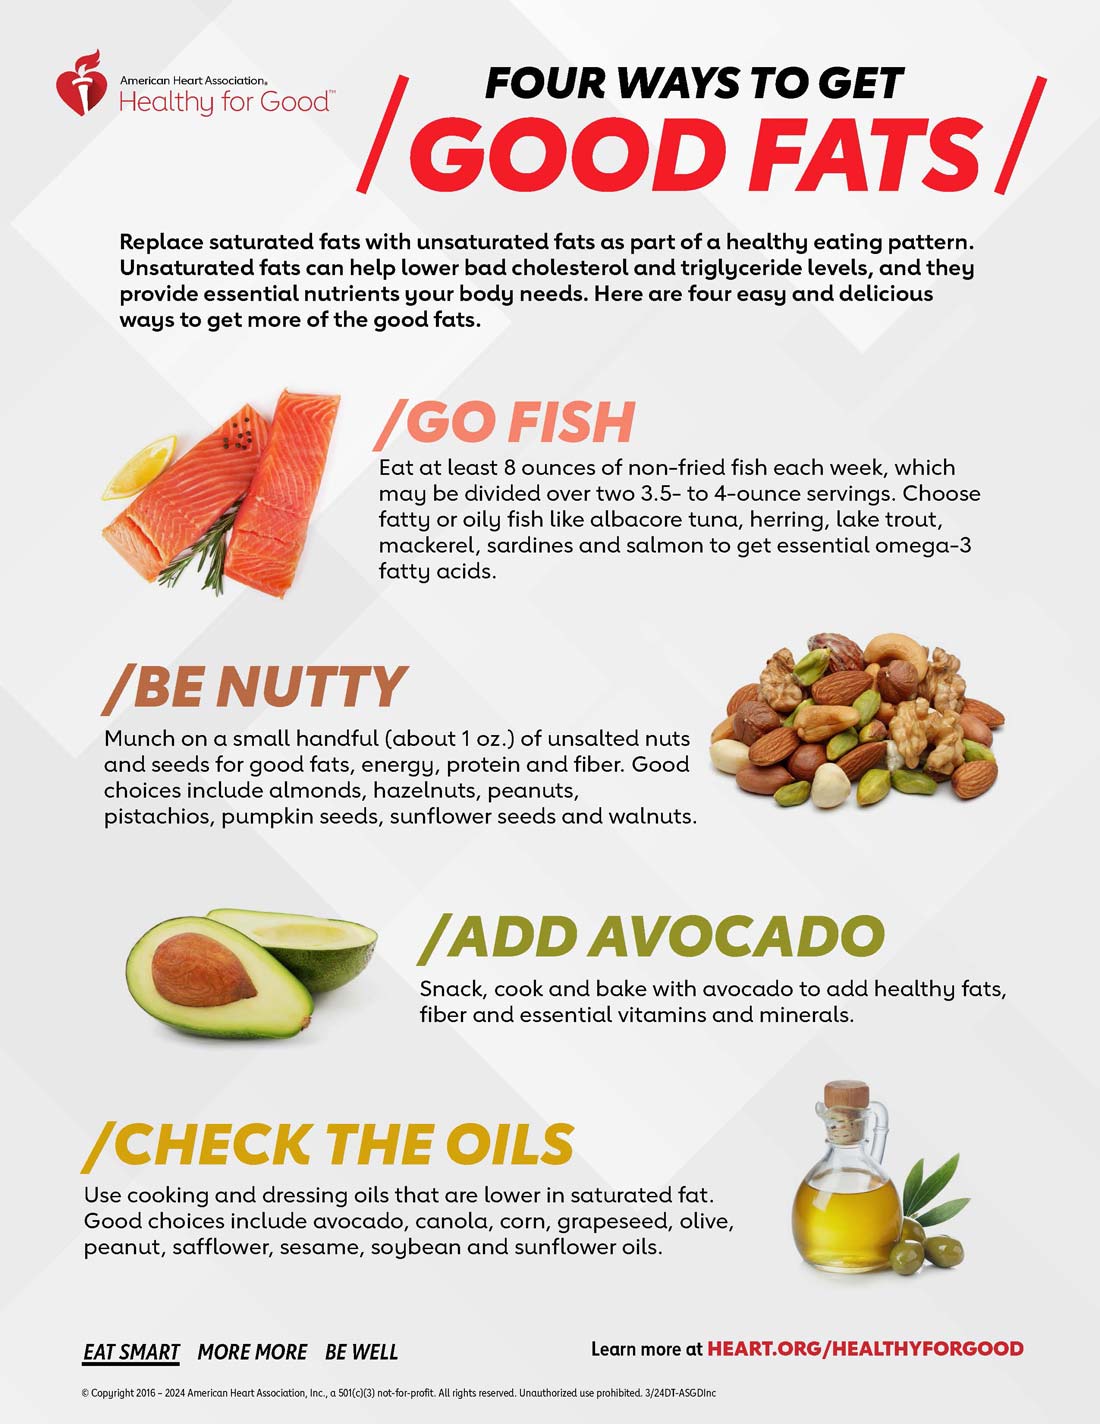 Good sources of fat